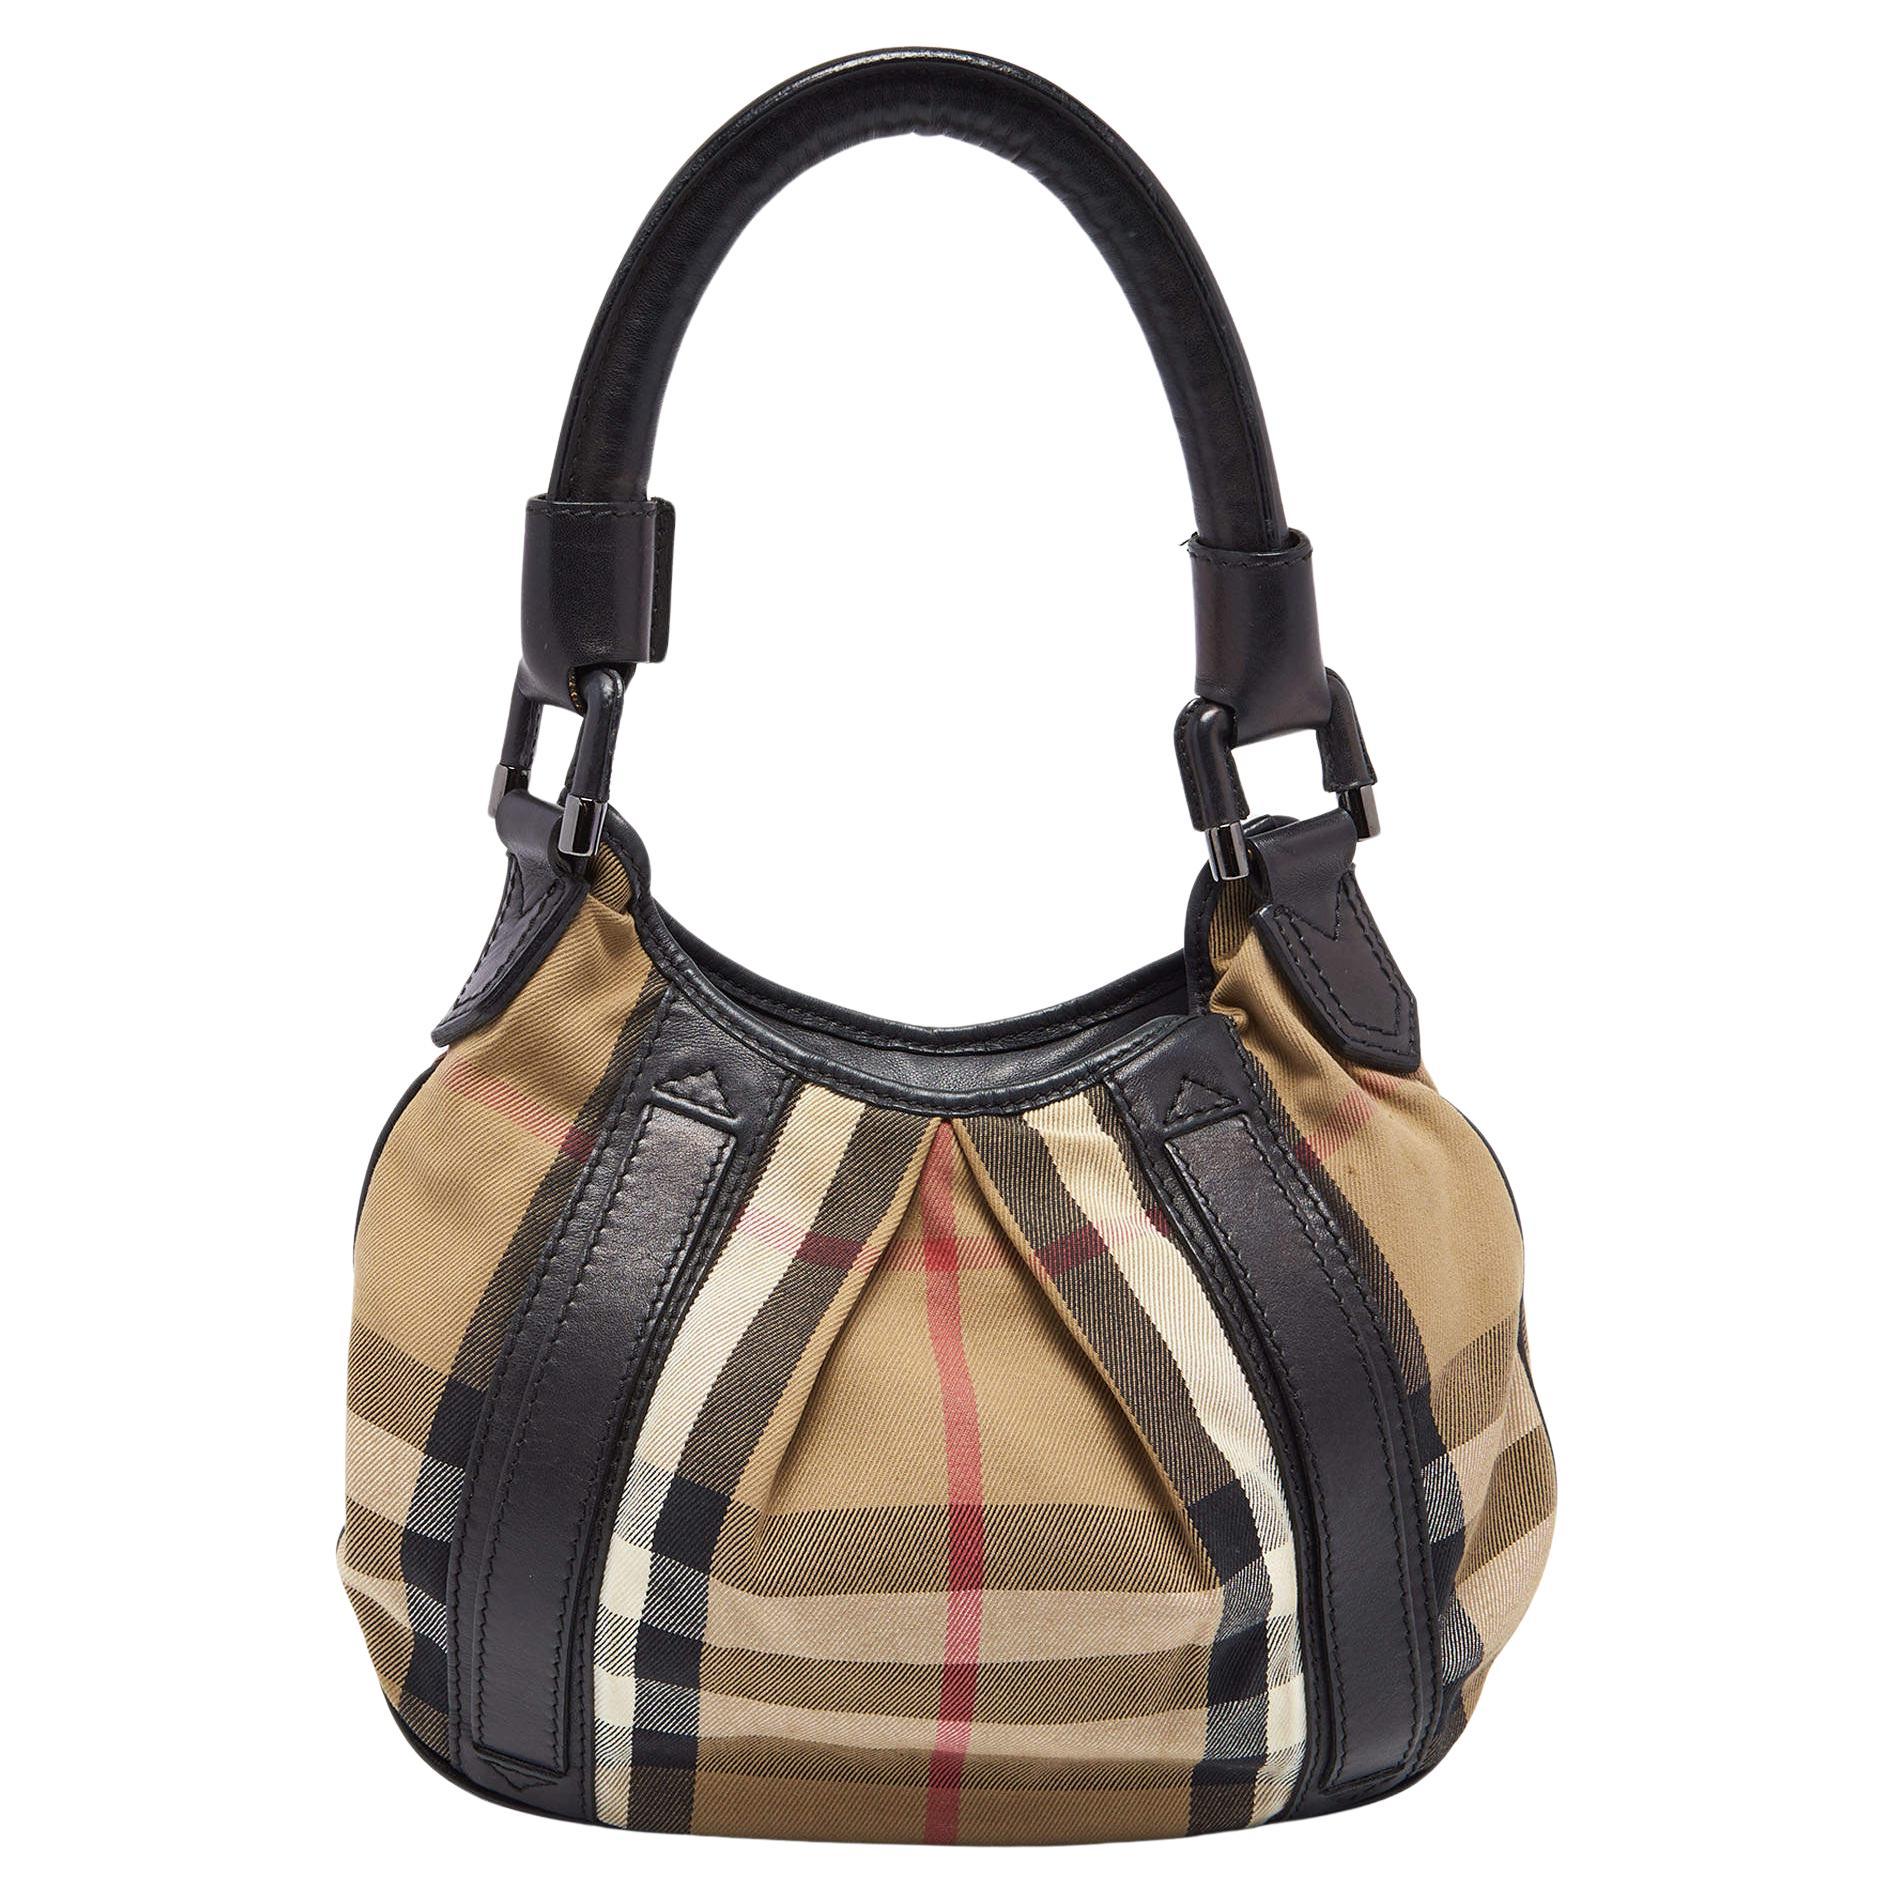 Burberry Black/Beige House Check Canvas and Leather Small Phoebe Hobo